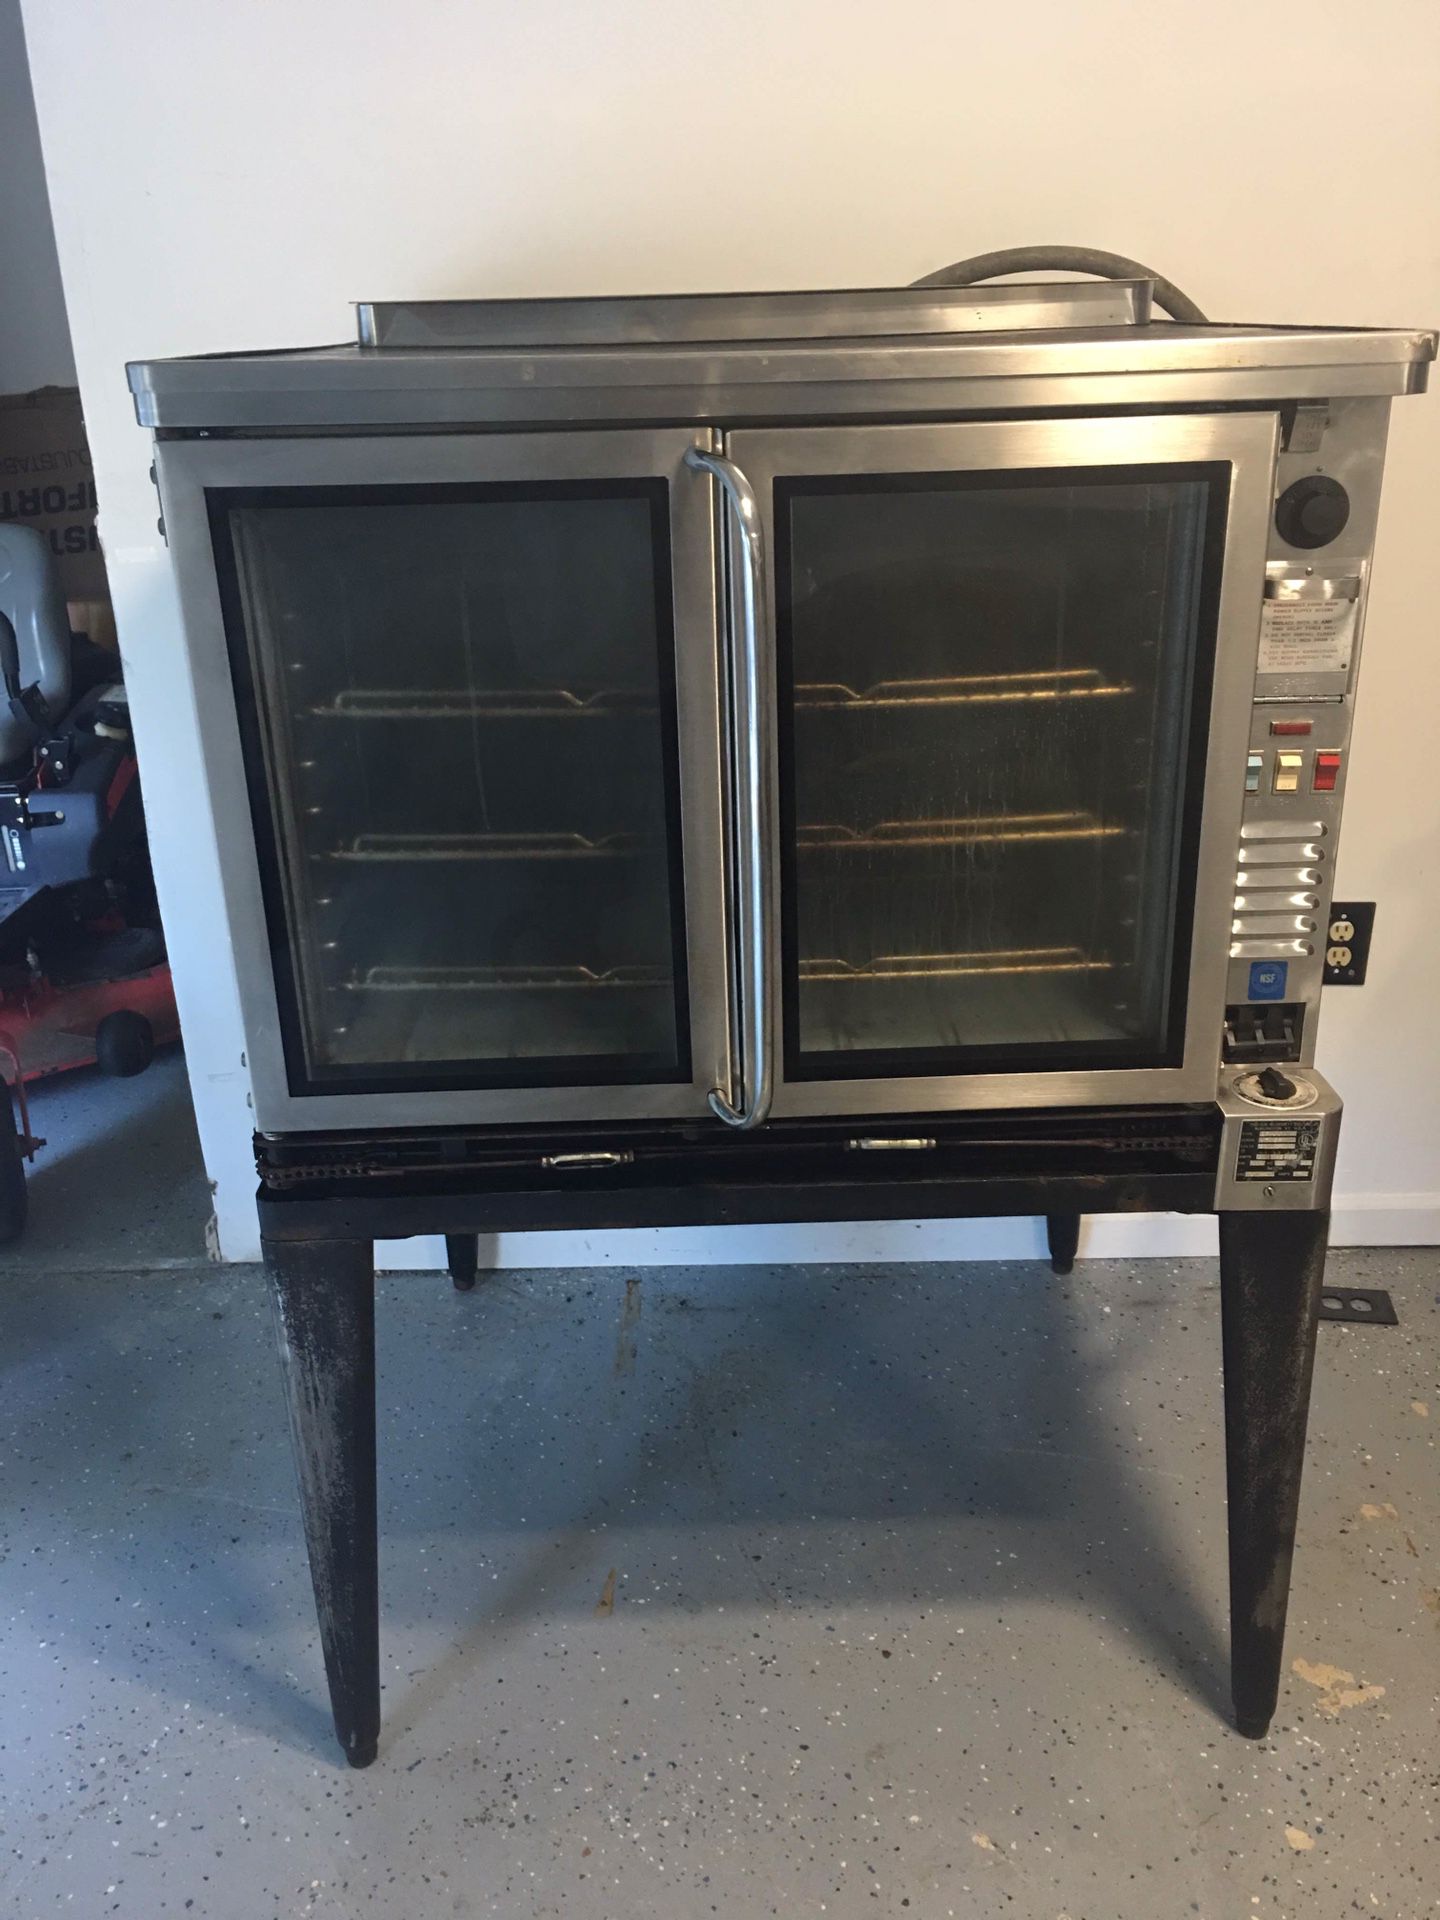 Blodgett EF 111 Commercial Convection Oven